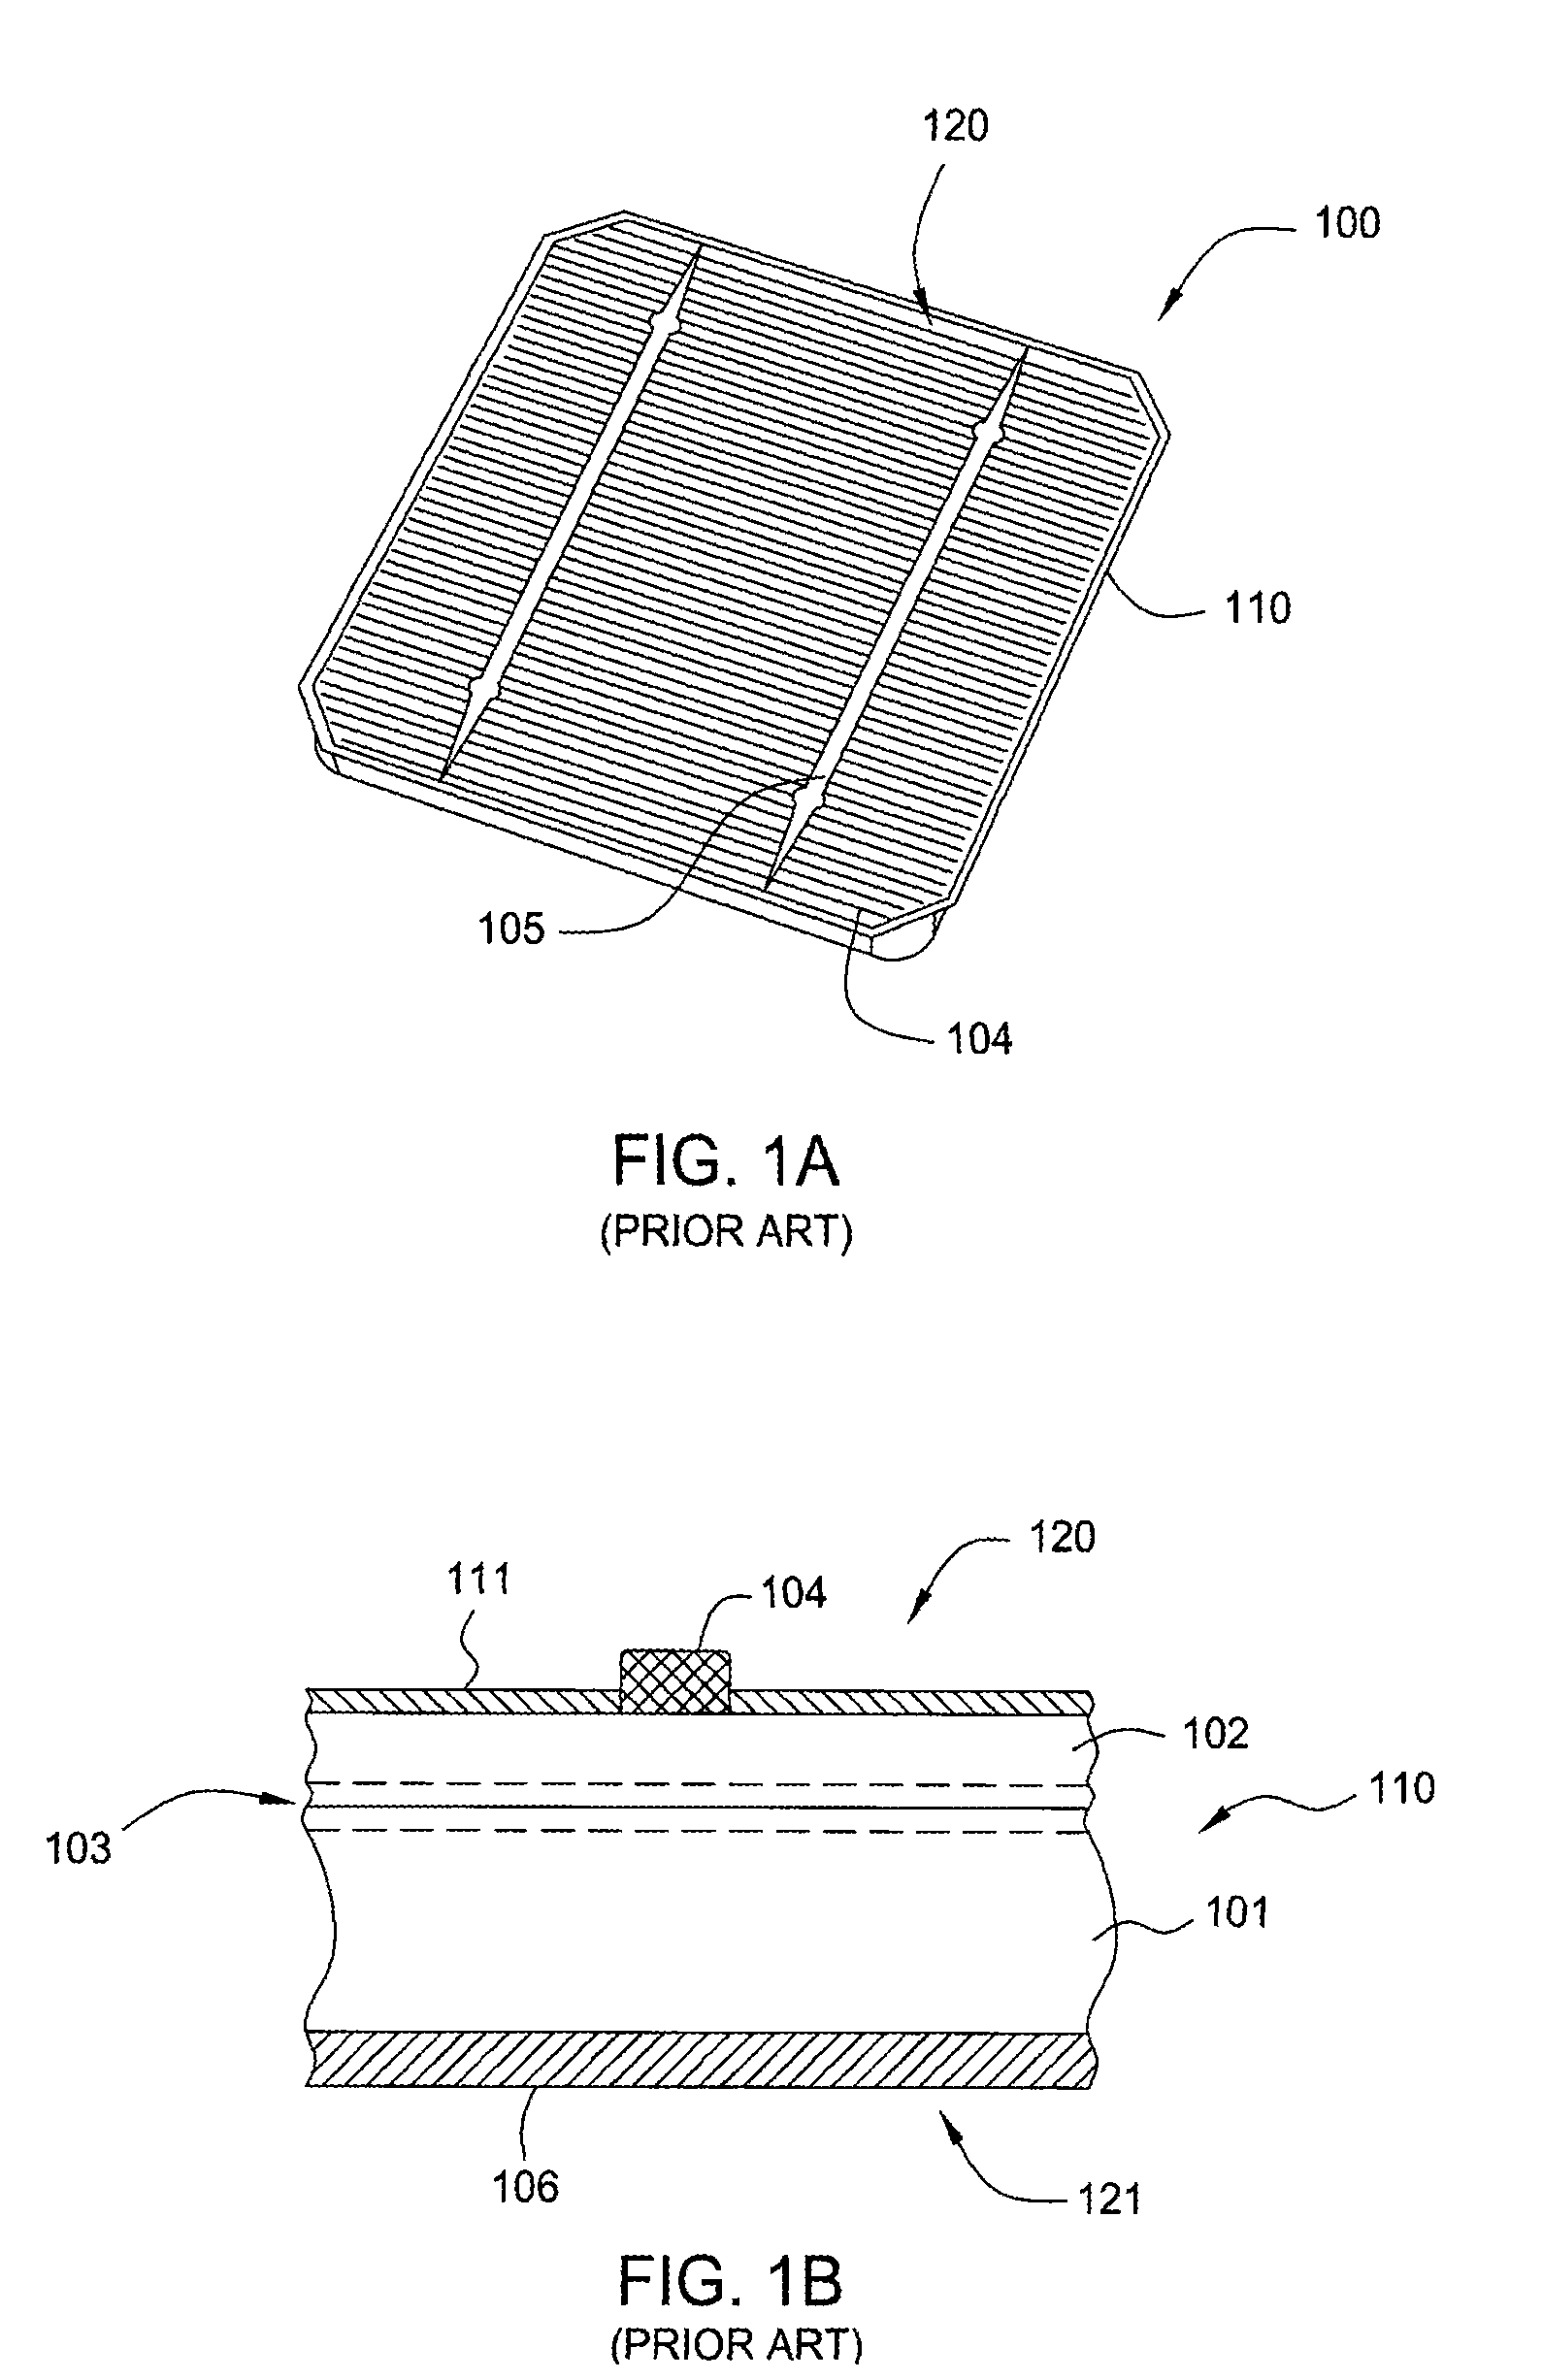 Electroplating on roll-to-roll flexible solar cell substrates